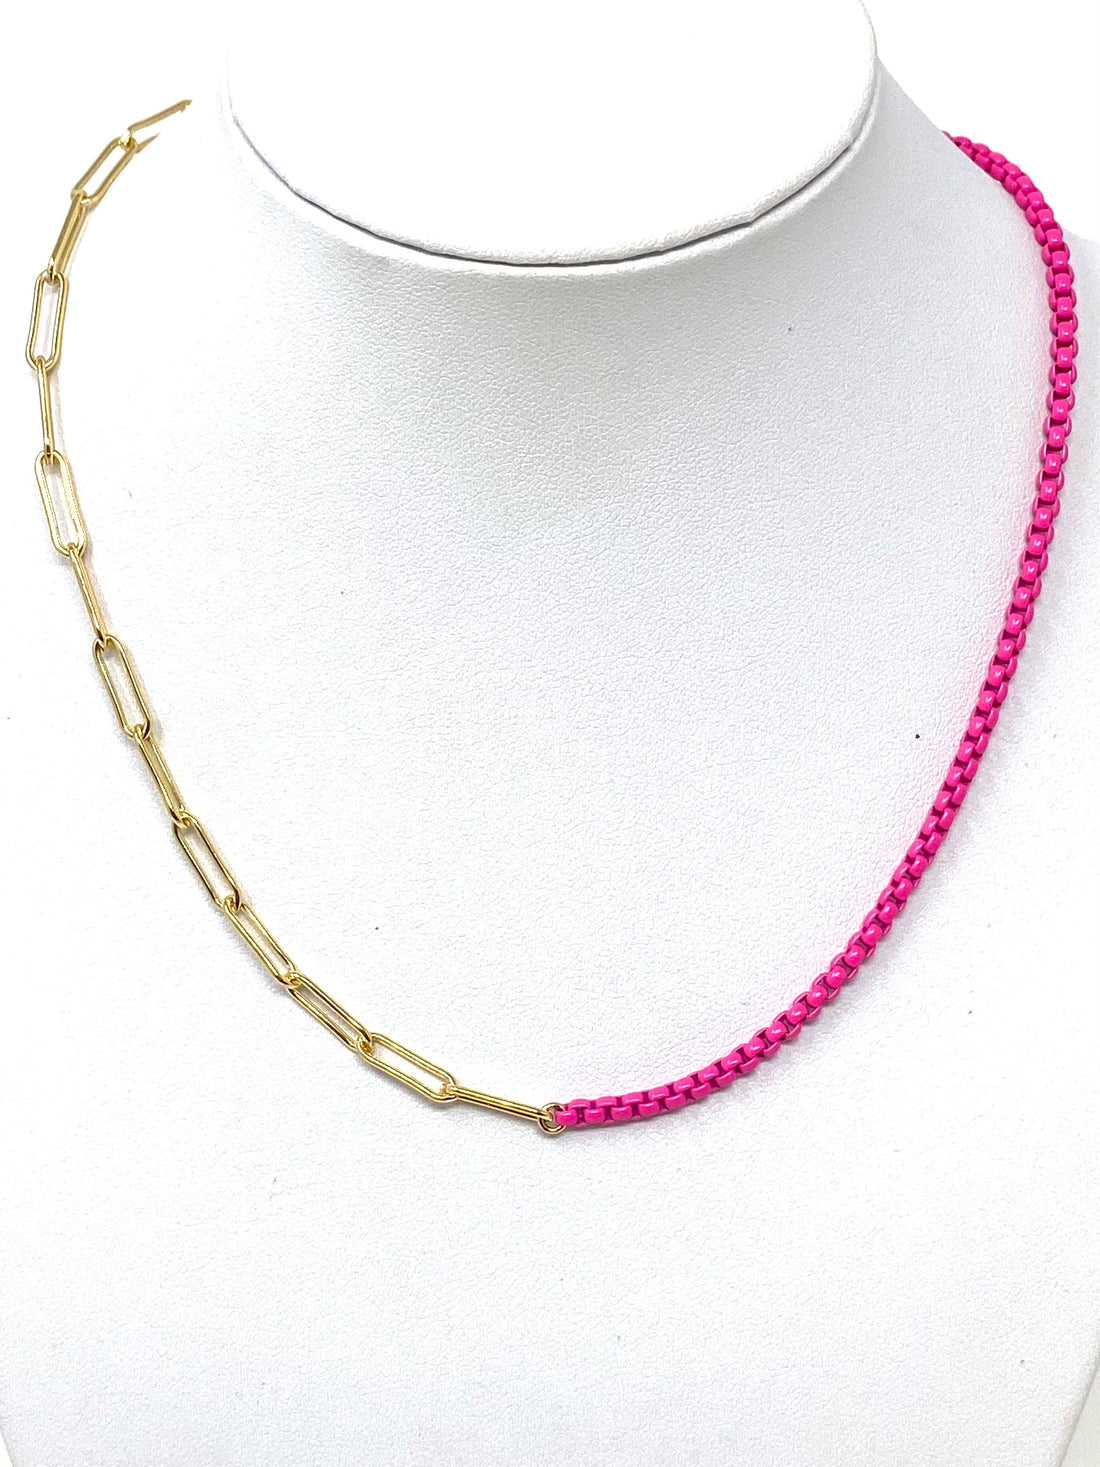 Going Dutch Chain in Hot Pink with Gold Chainlink